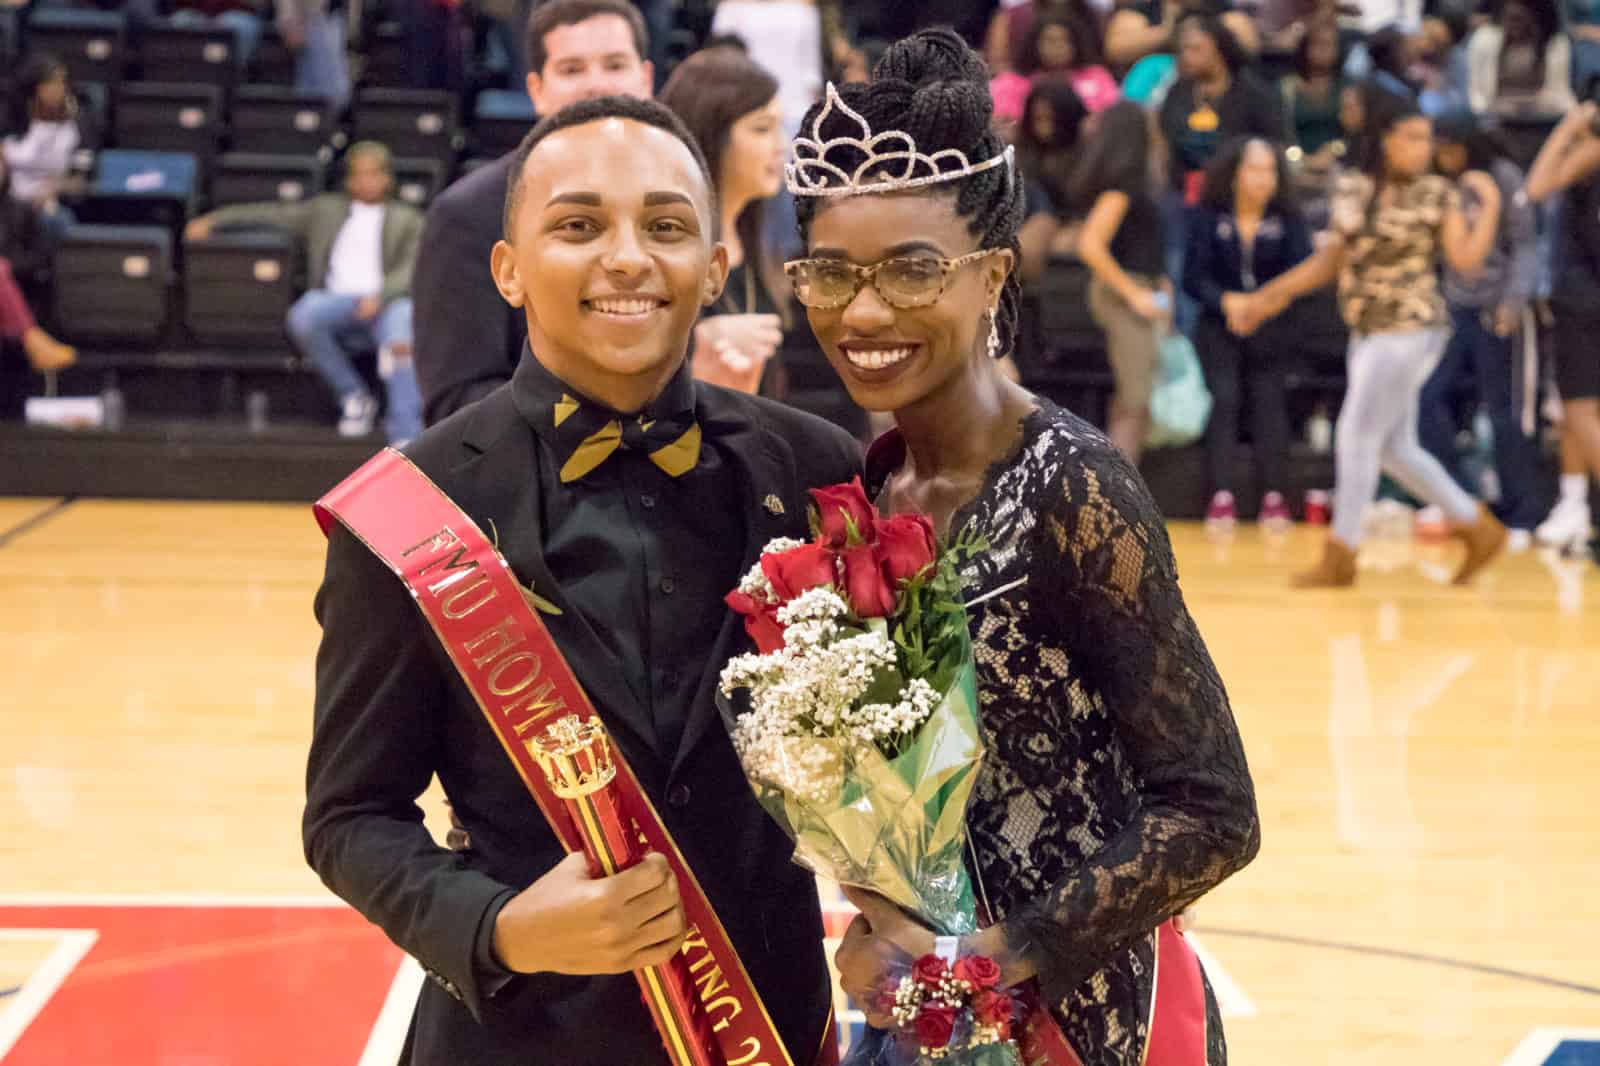 FMU crowns 2017 Homecoming king and queen